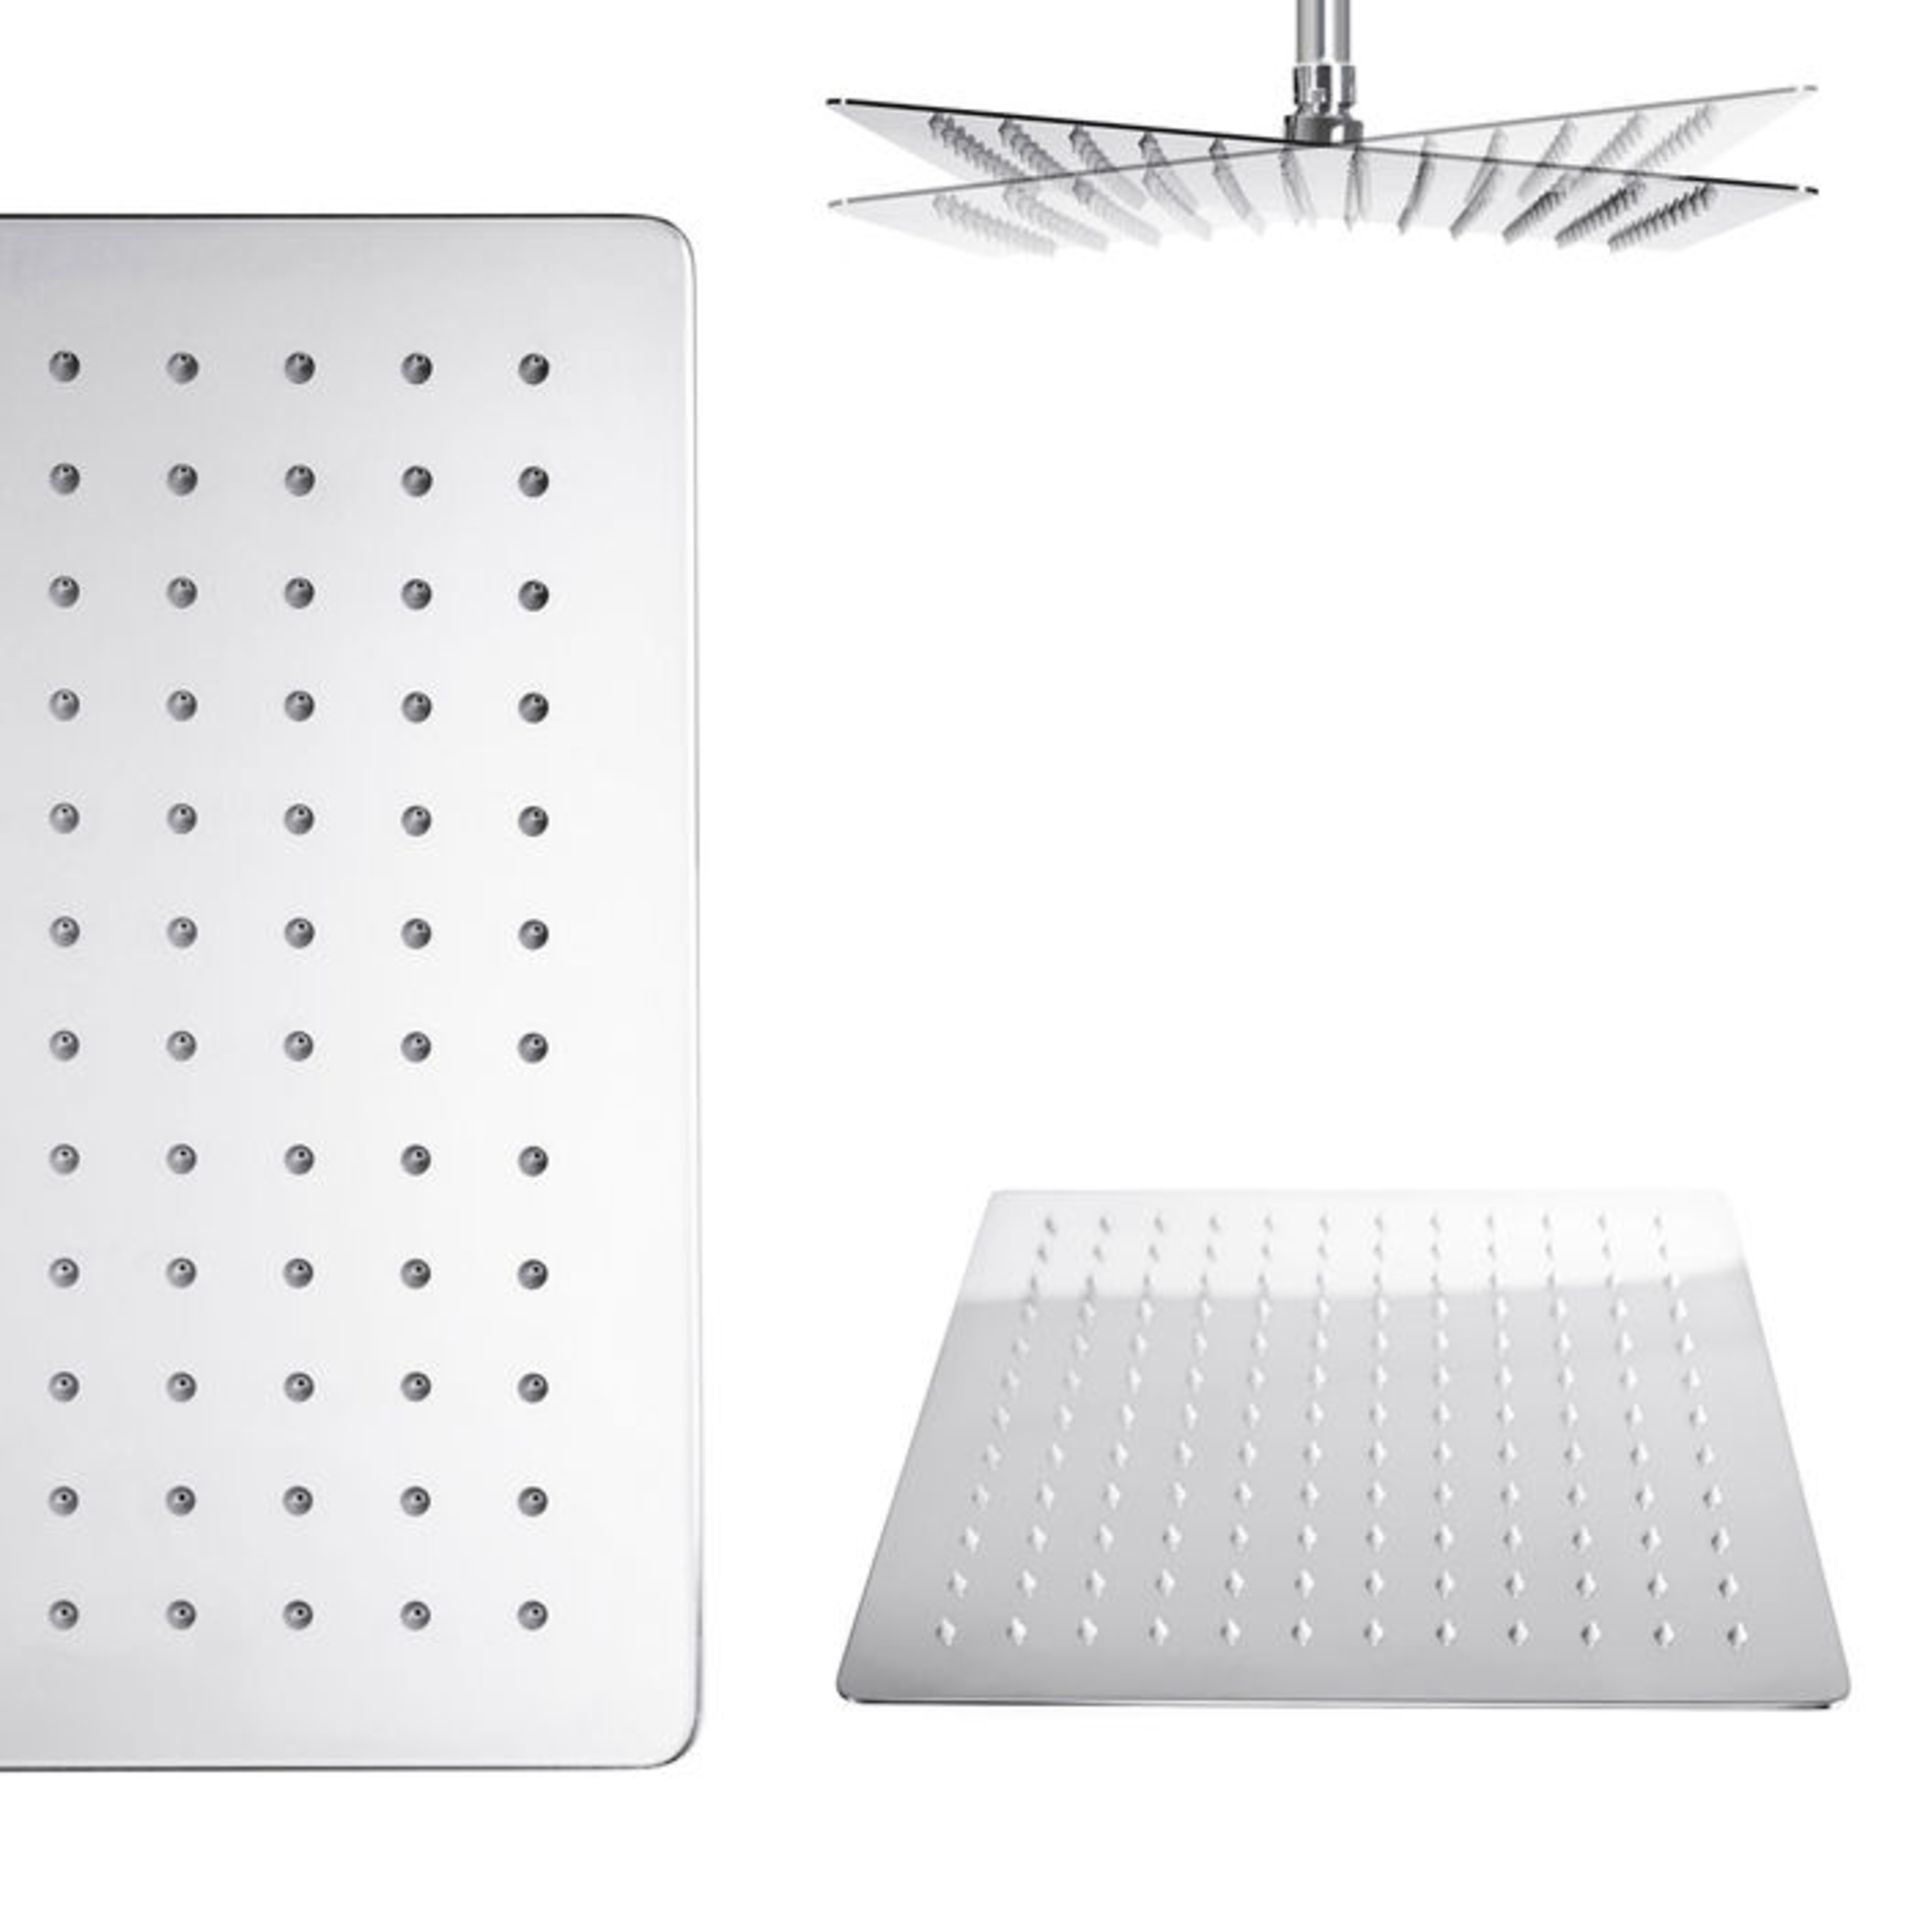 (MP31) Stainless Steel 300mm Square Shower Head Solid metal structure Can be wall or ceiling mounted